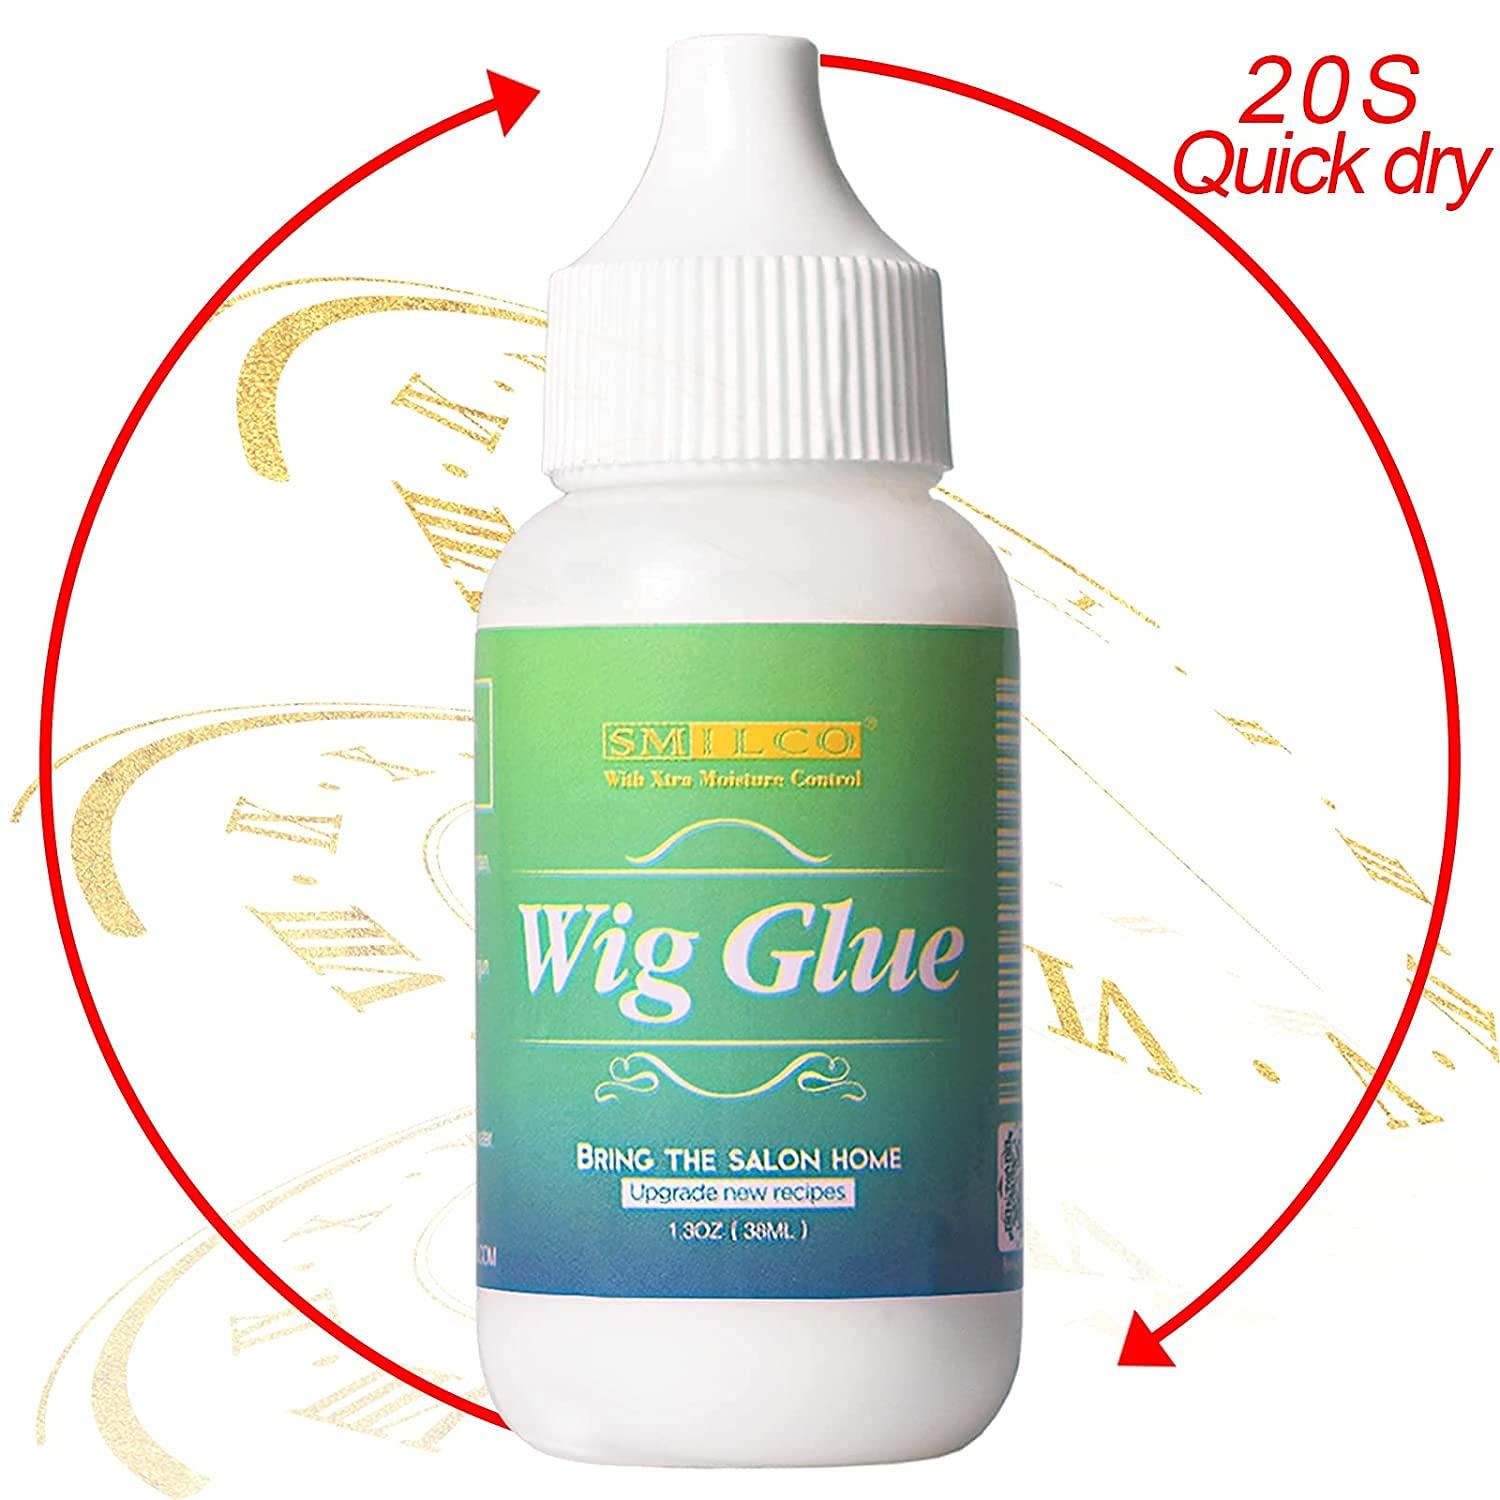 Wig Glue for Front Lace Wig - Waterproof Lace Glue - Latex-Free and Oil-Resistant Hair Adhesive Glue, Size: One Size